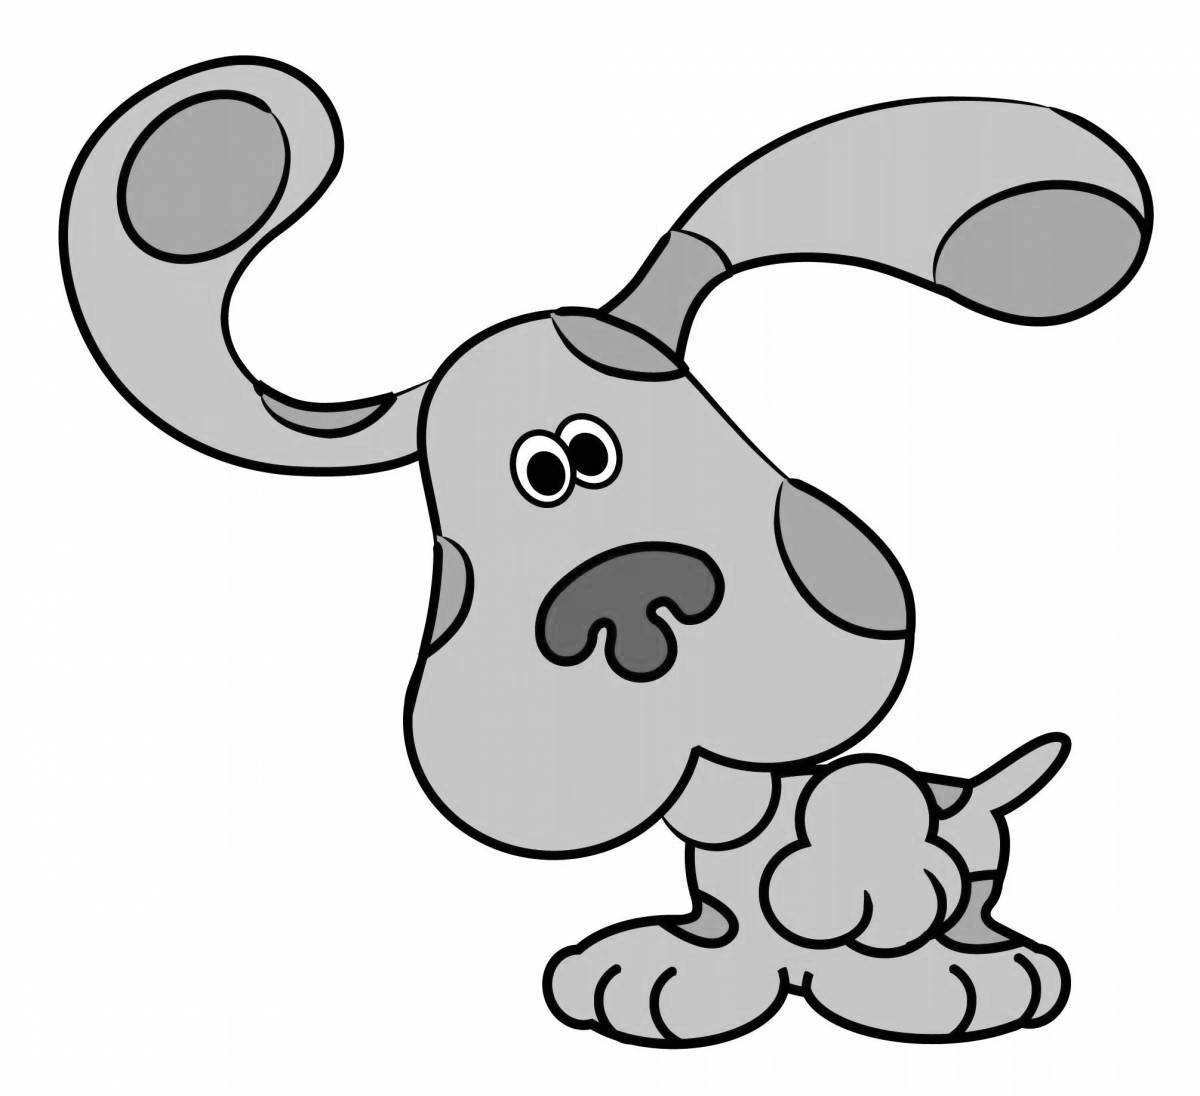 Coloring page playful blue puppy